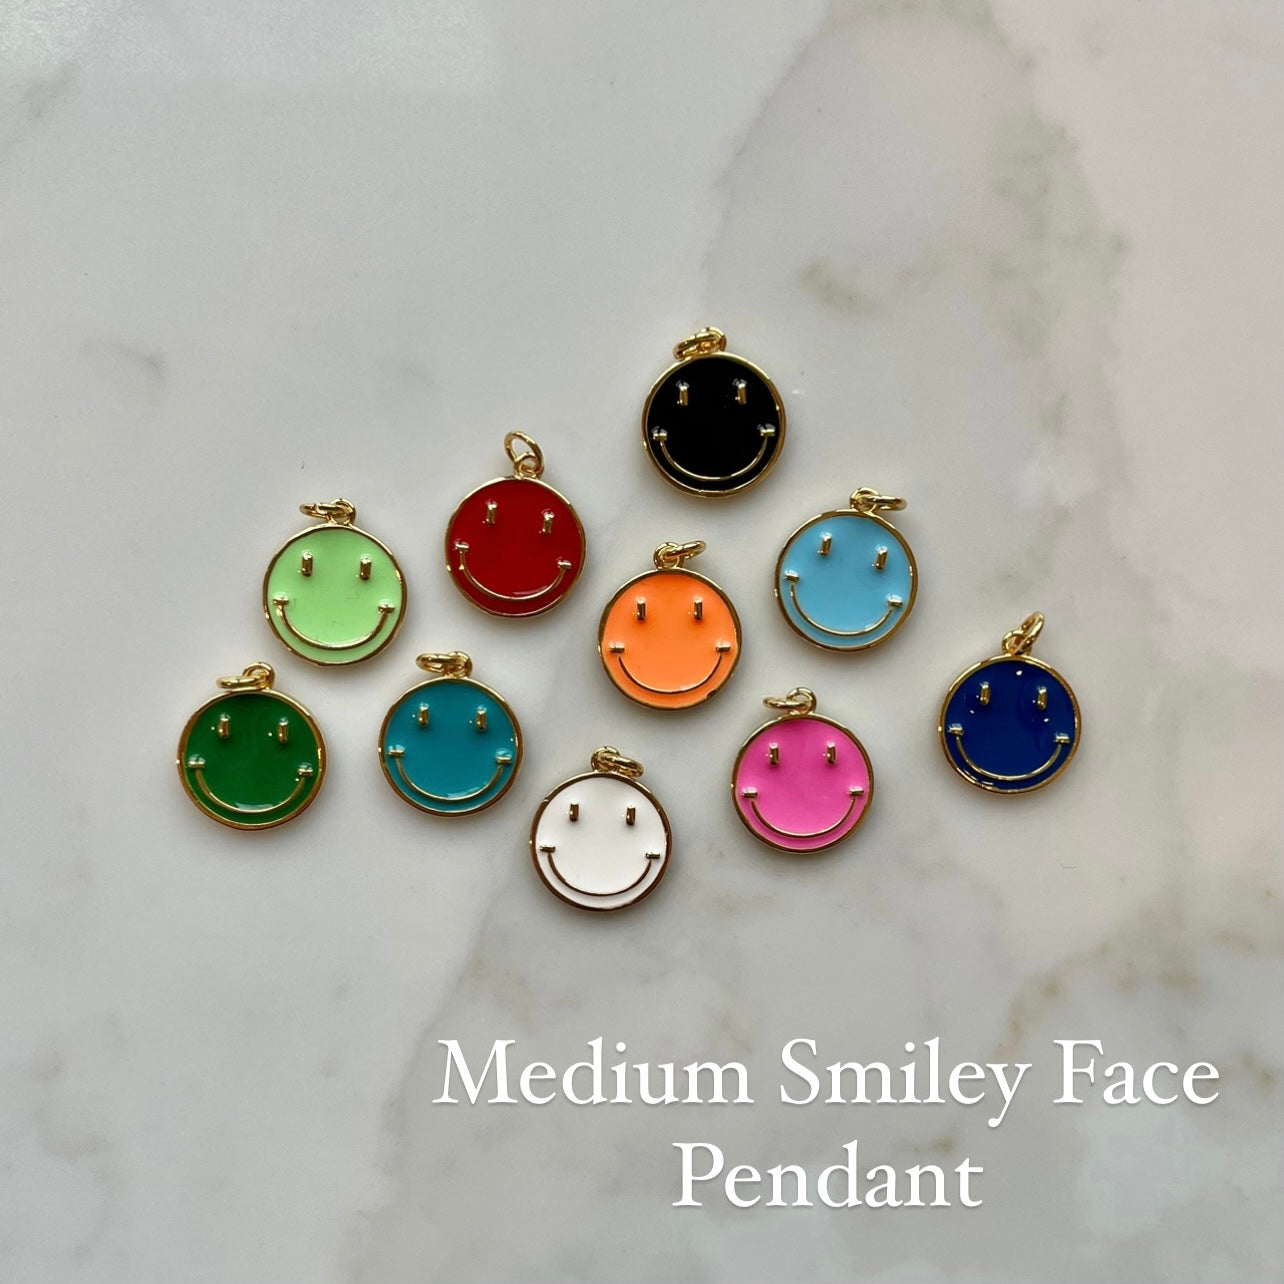 Medium Smiley Face Pendant for the Necklace Kit